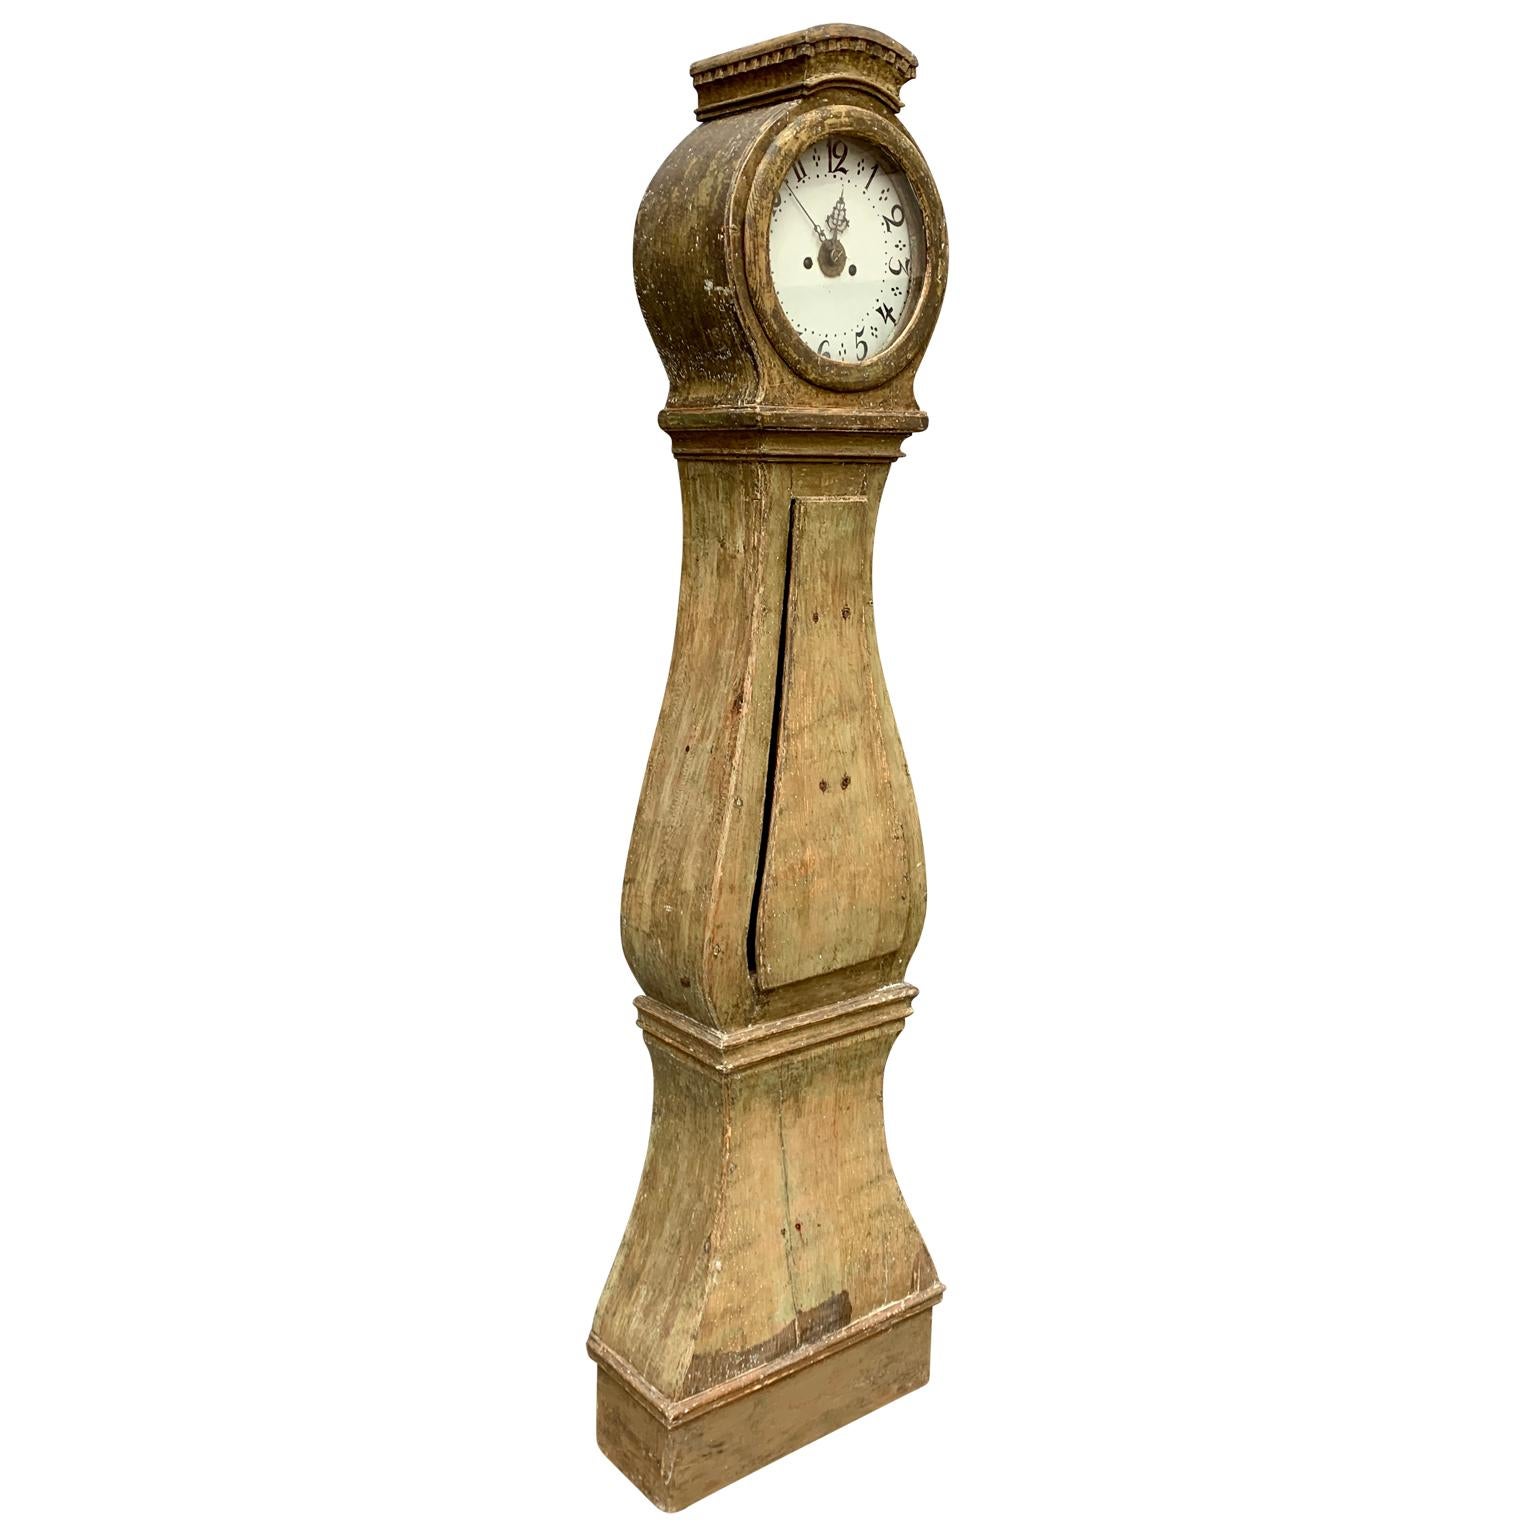 A Swedish antique Mora clock dating from ca 1800 in its original paint.
The original mechanism, pendulum and weights are included. We do not guarantee functionality. This Grand-father clock has carefully been 